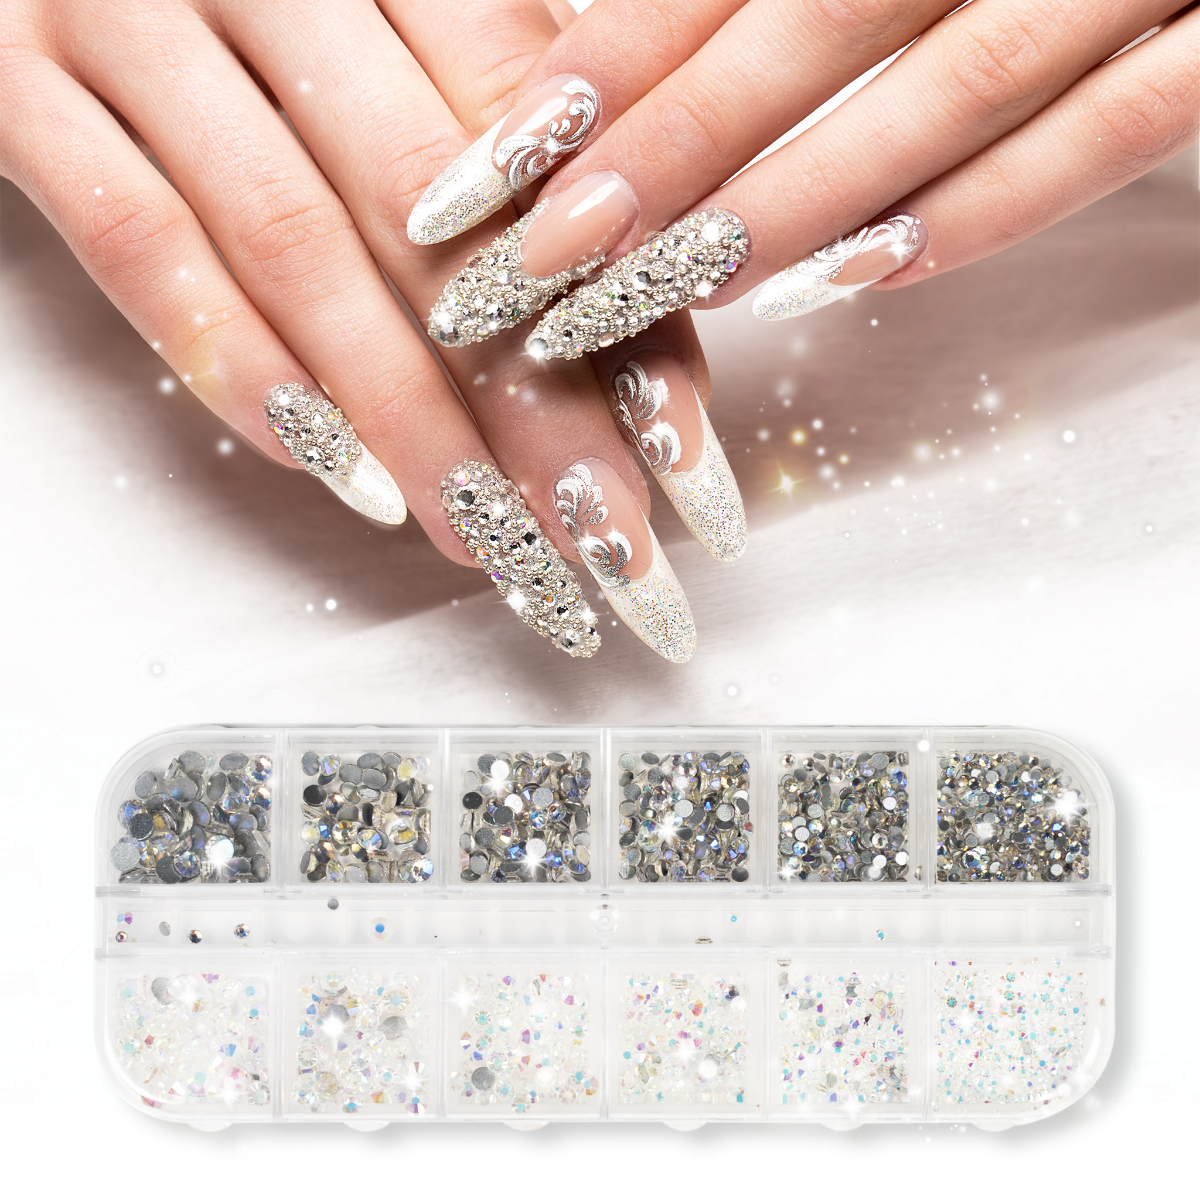 Buy I-BLINK Convenient and Stylish: Explore Our 500pc Artificial Nails  Pouch for Endless Nail Art Possibilities (A-18) Online at Low Prices in  India - Amazon.in